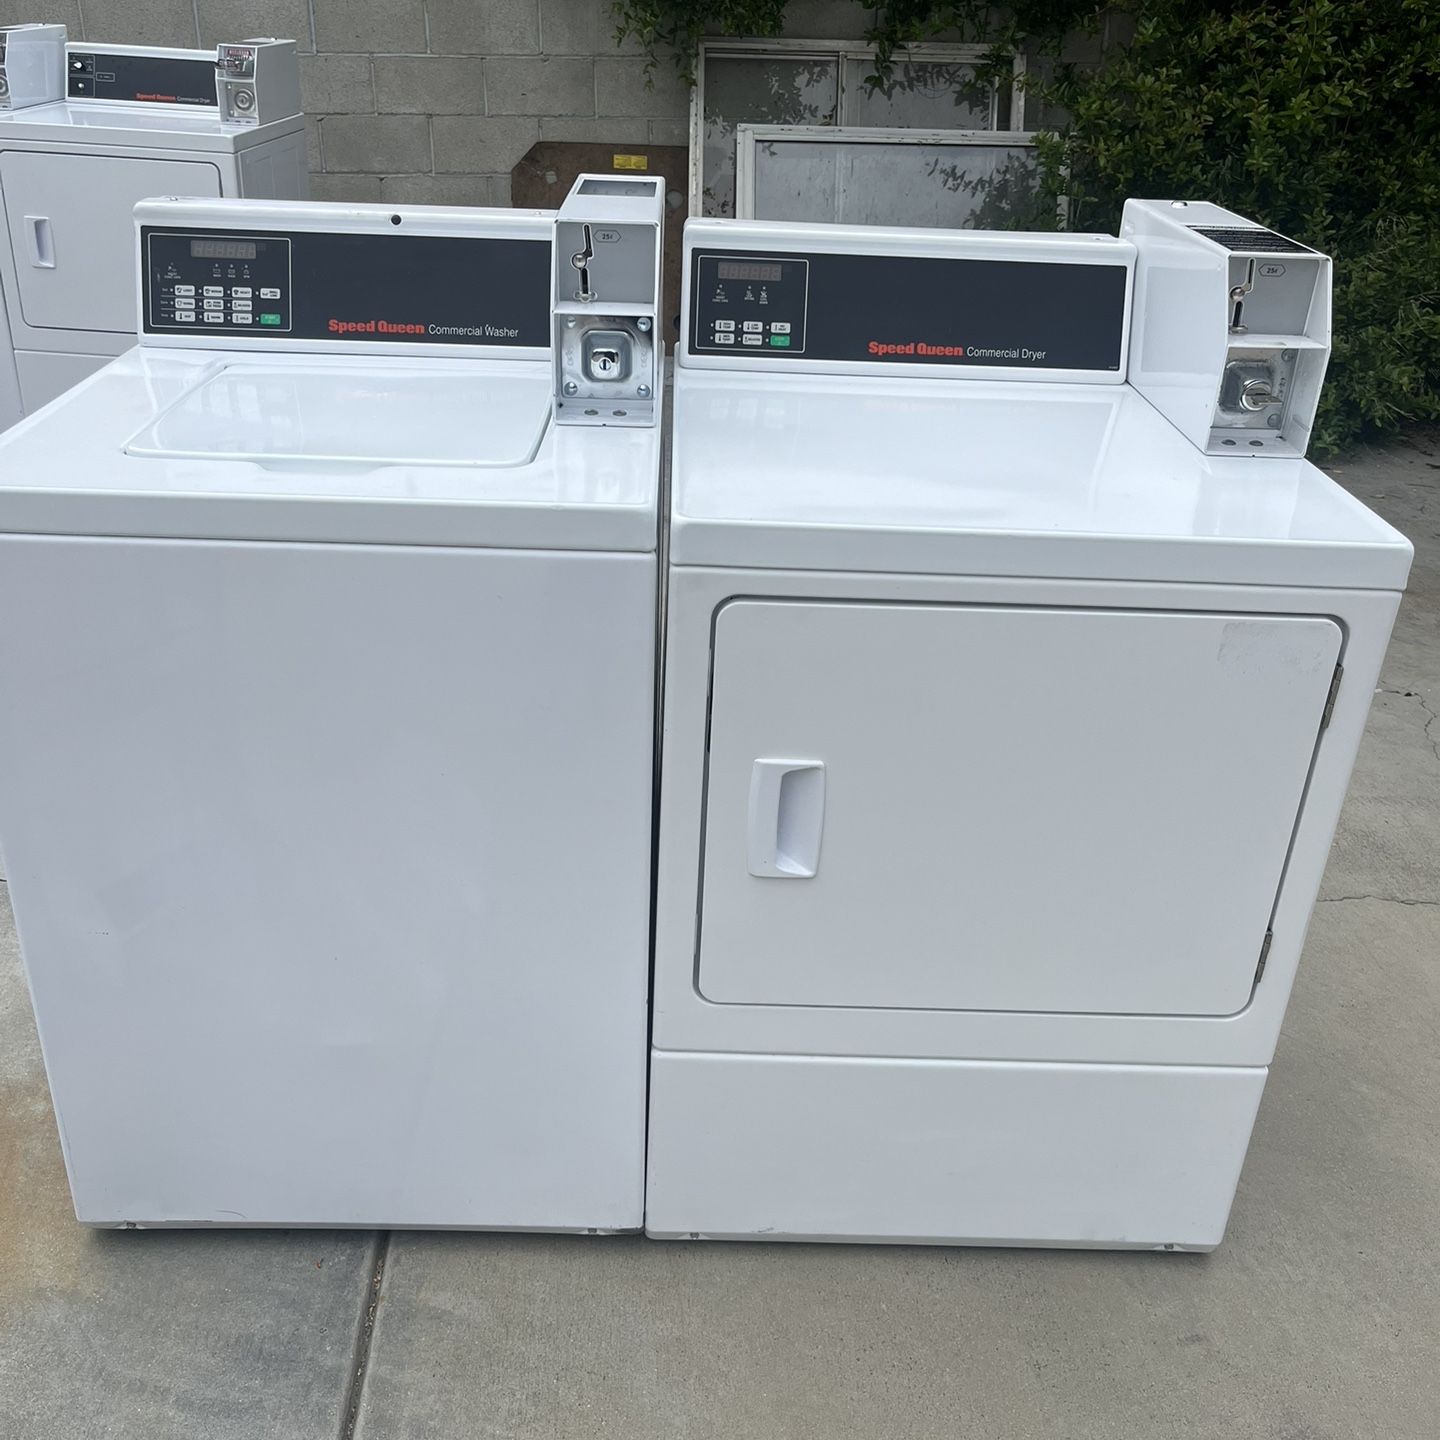 Speed Queen Washer and Dryer 